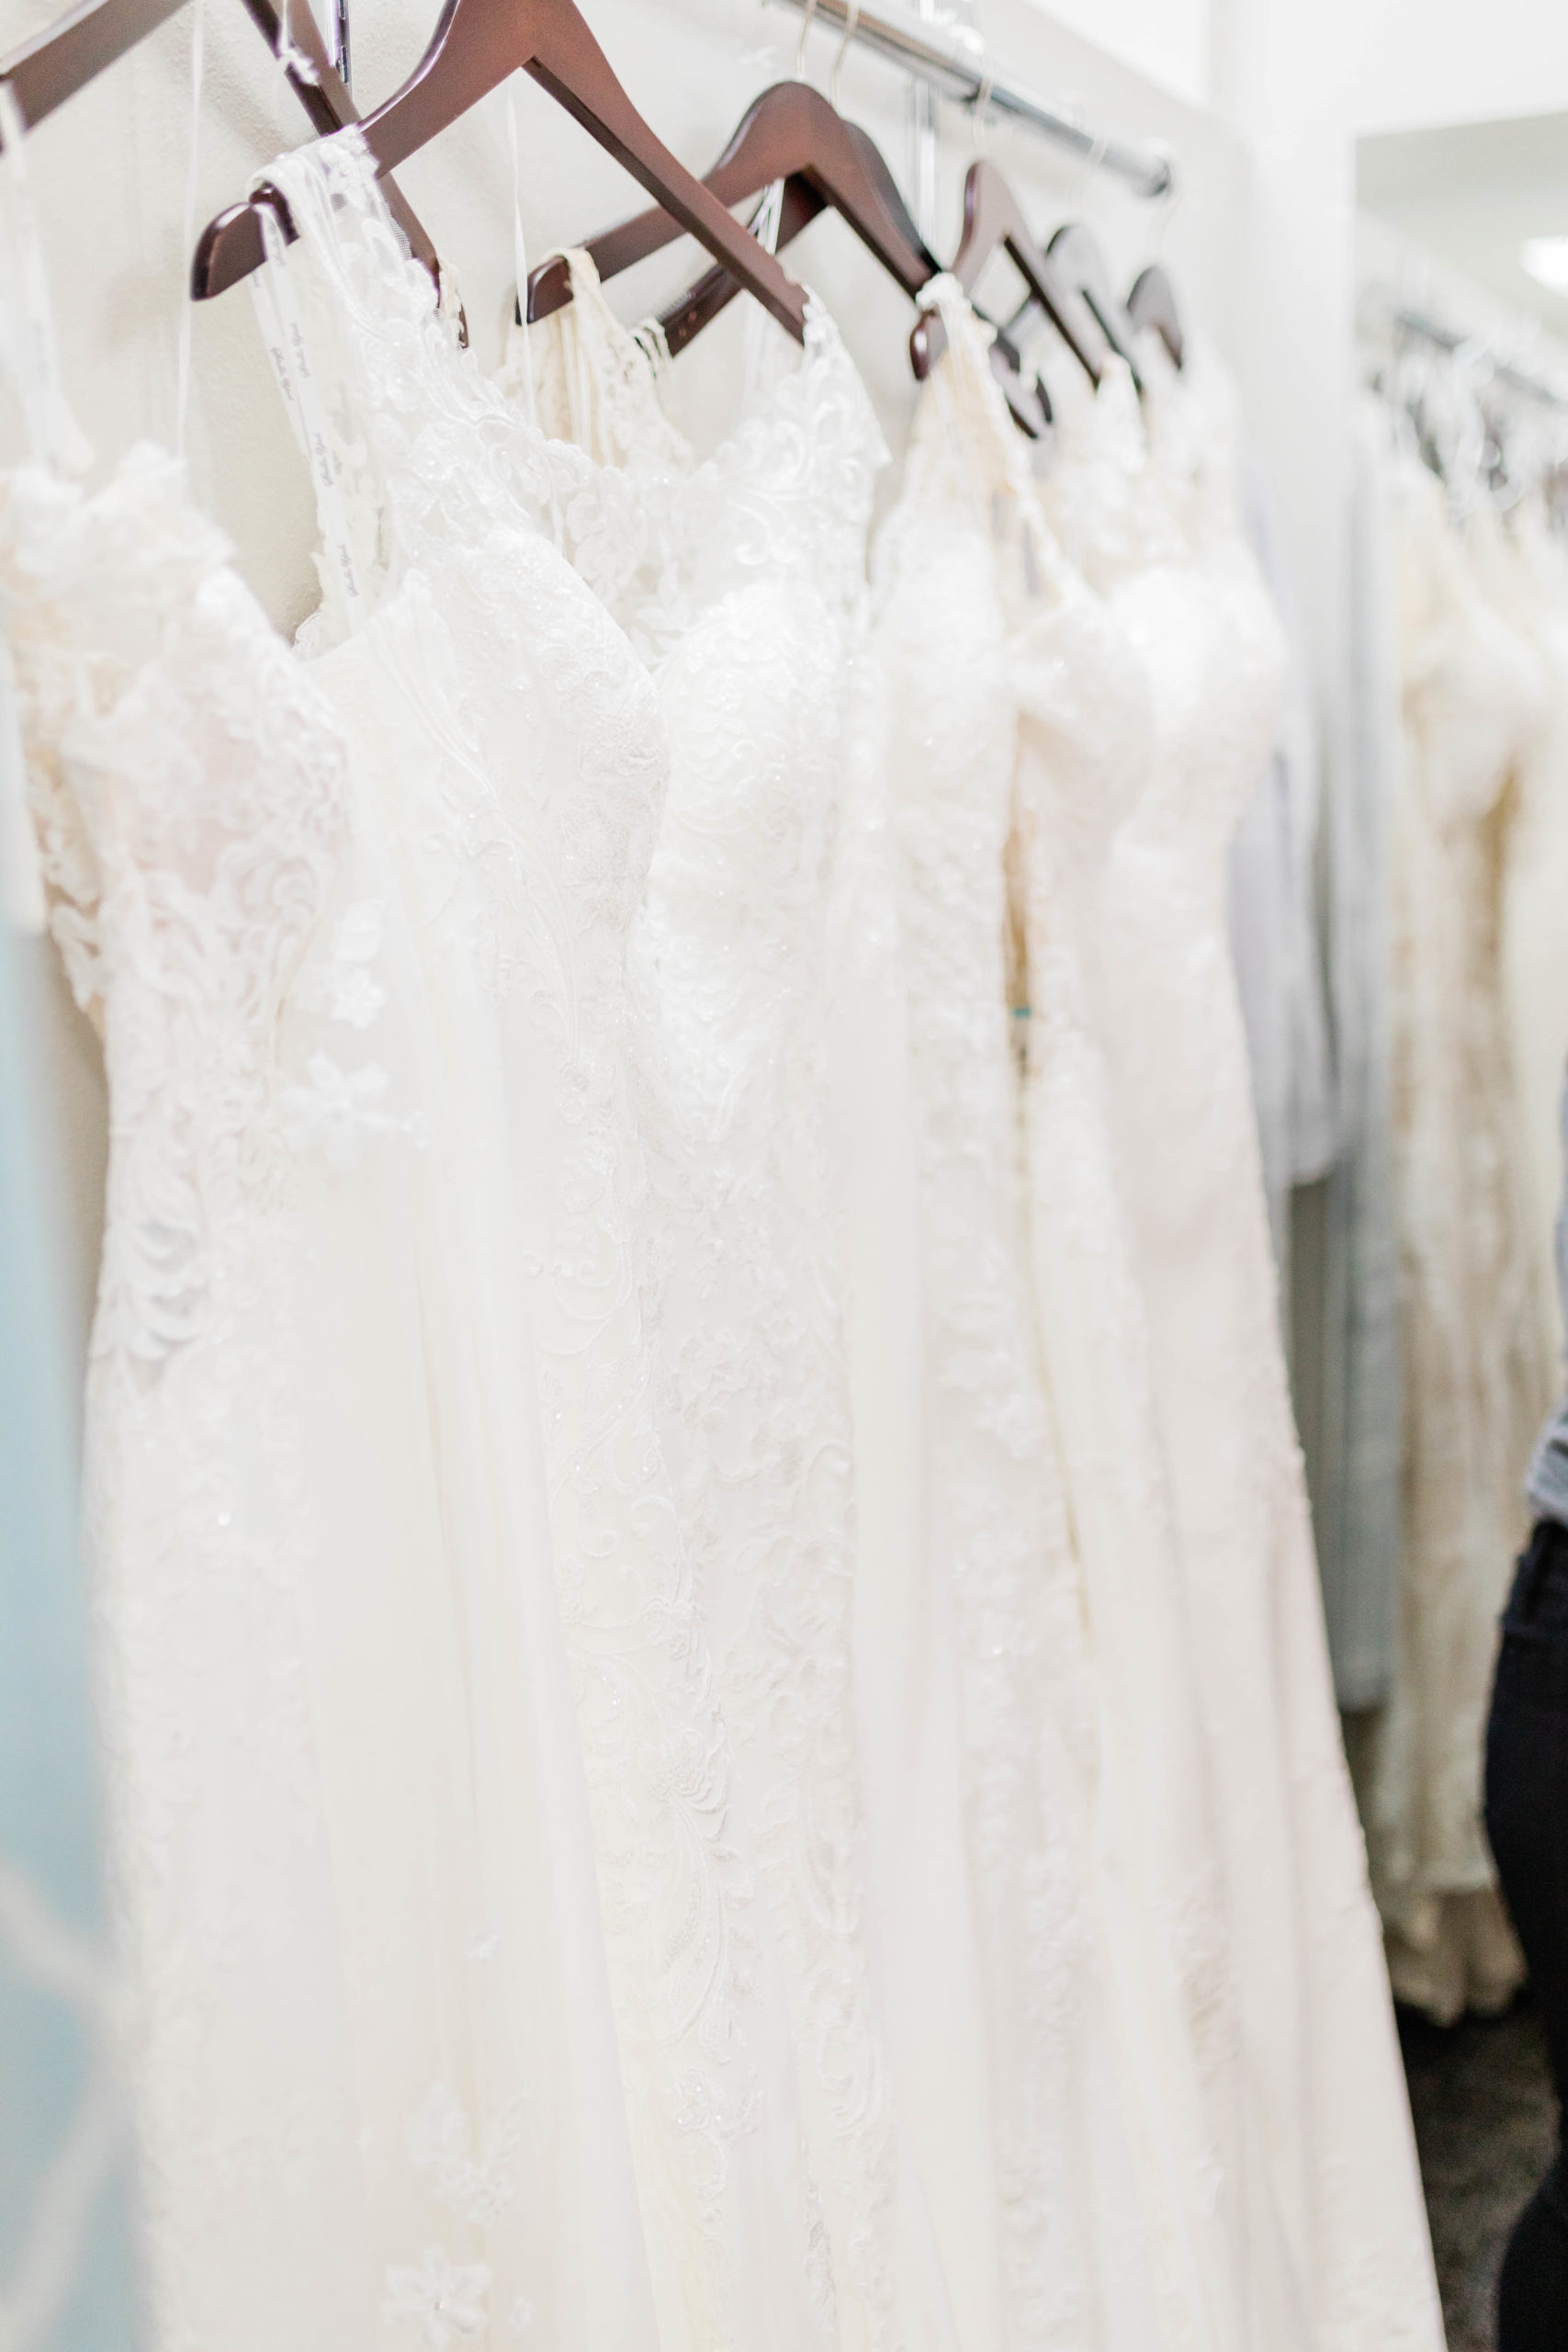 detail shot of lace wedding dresses hanging on the rack at Boise bridal shop photographed by Boise wedding photographer